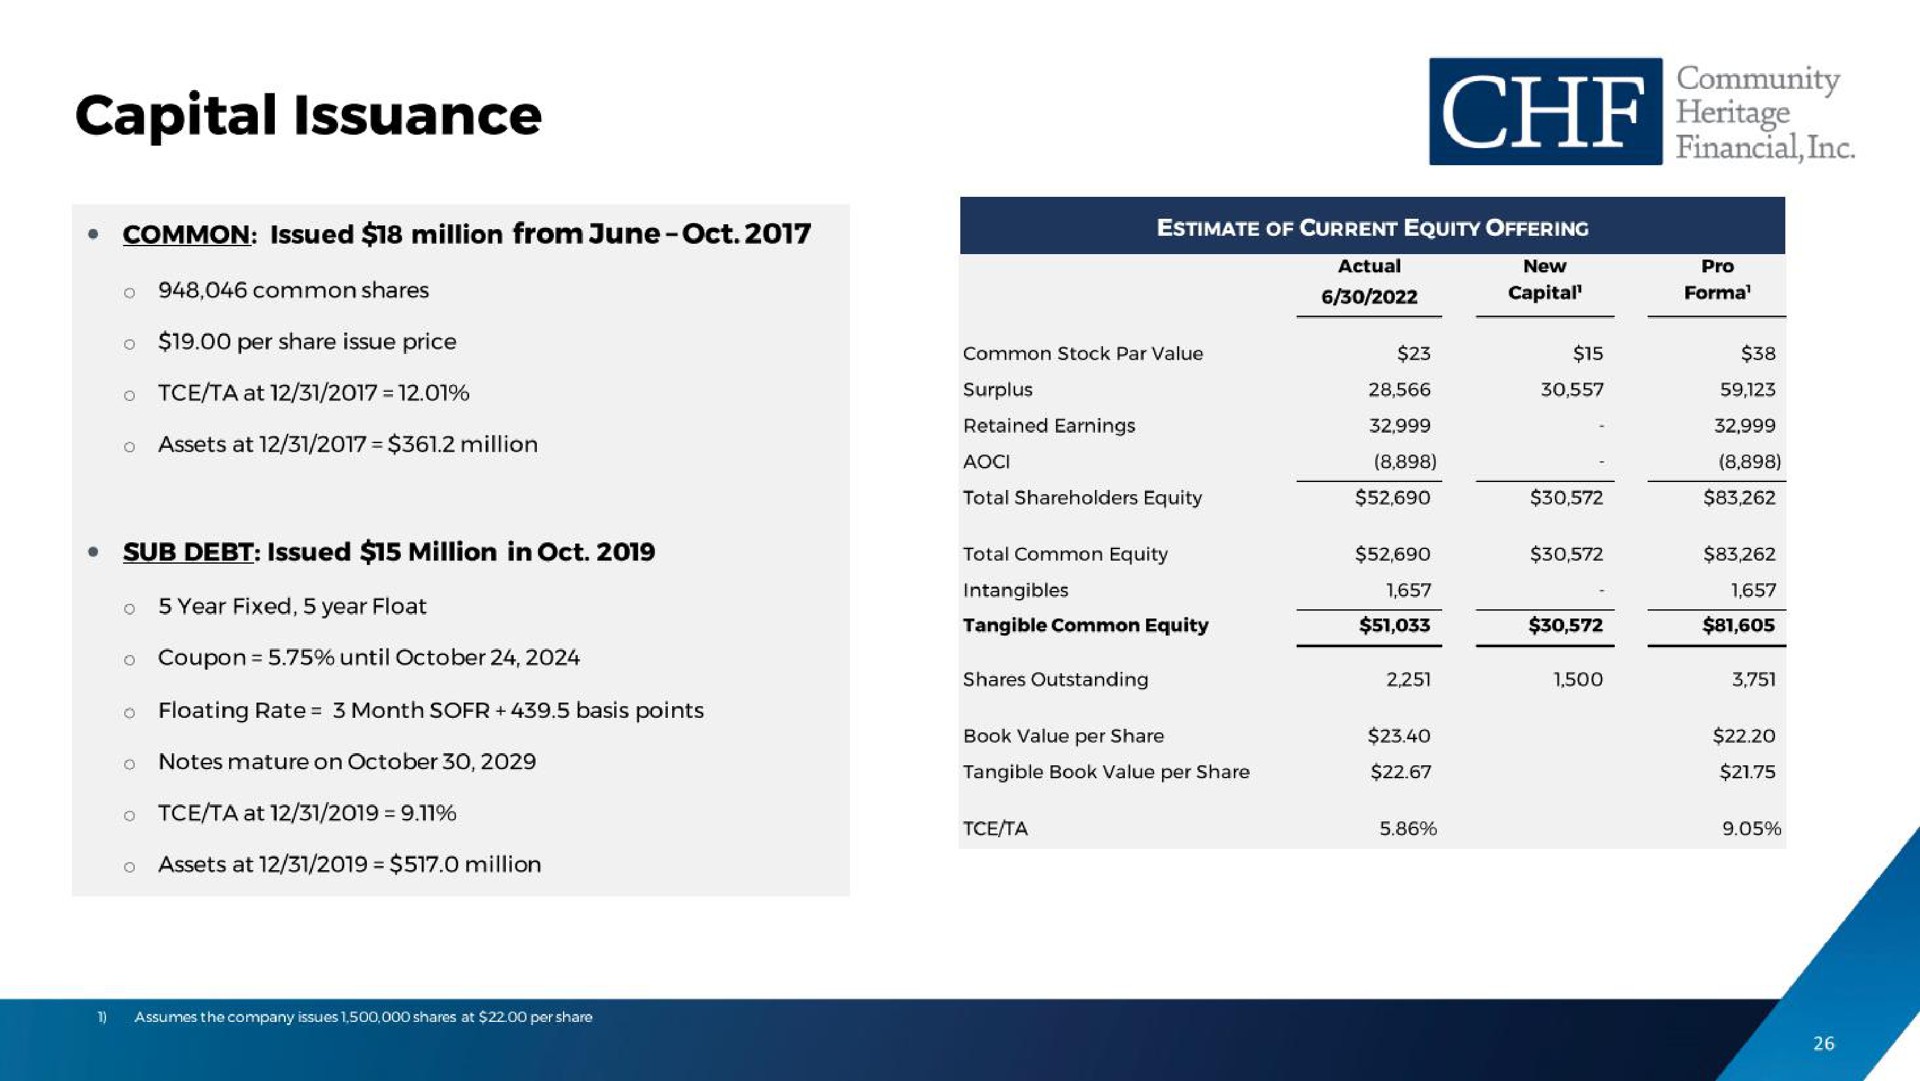 capital issuance | Community Heritage Financial